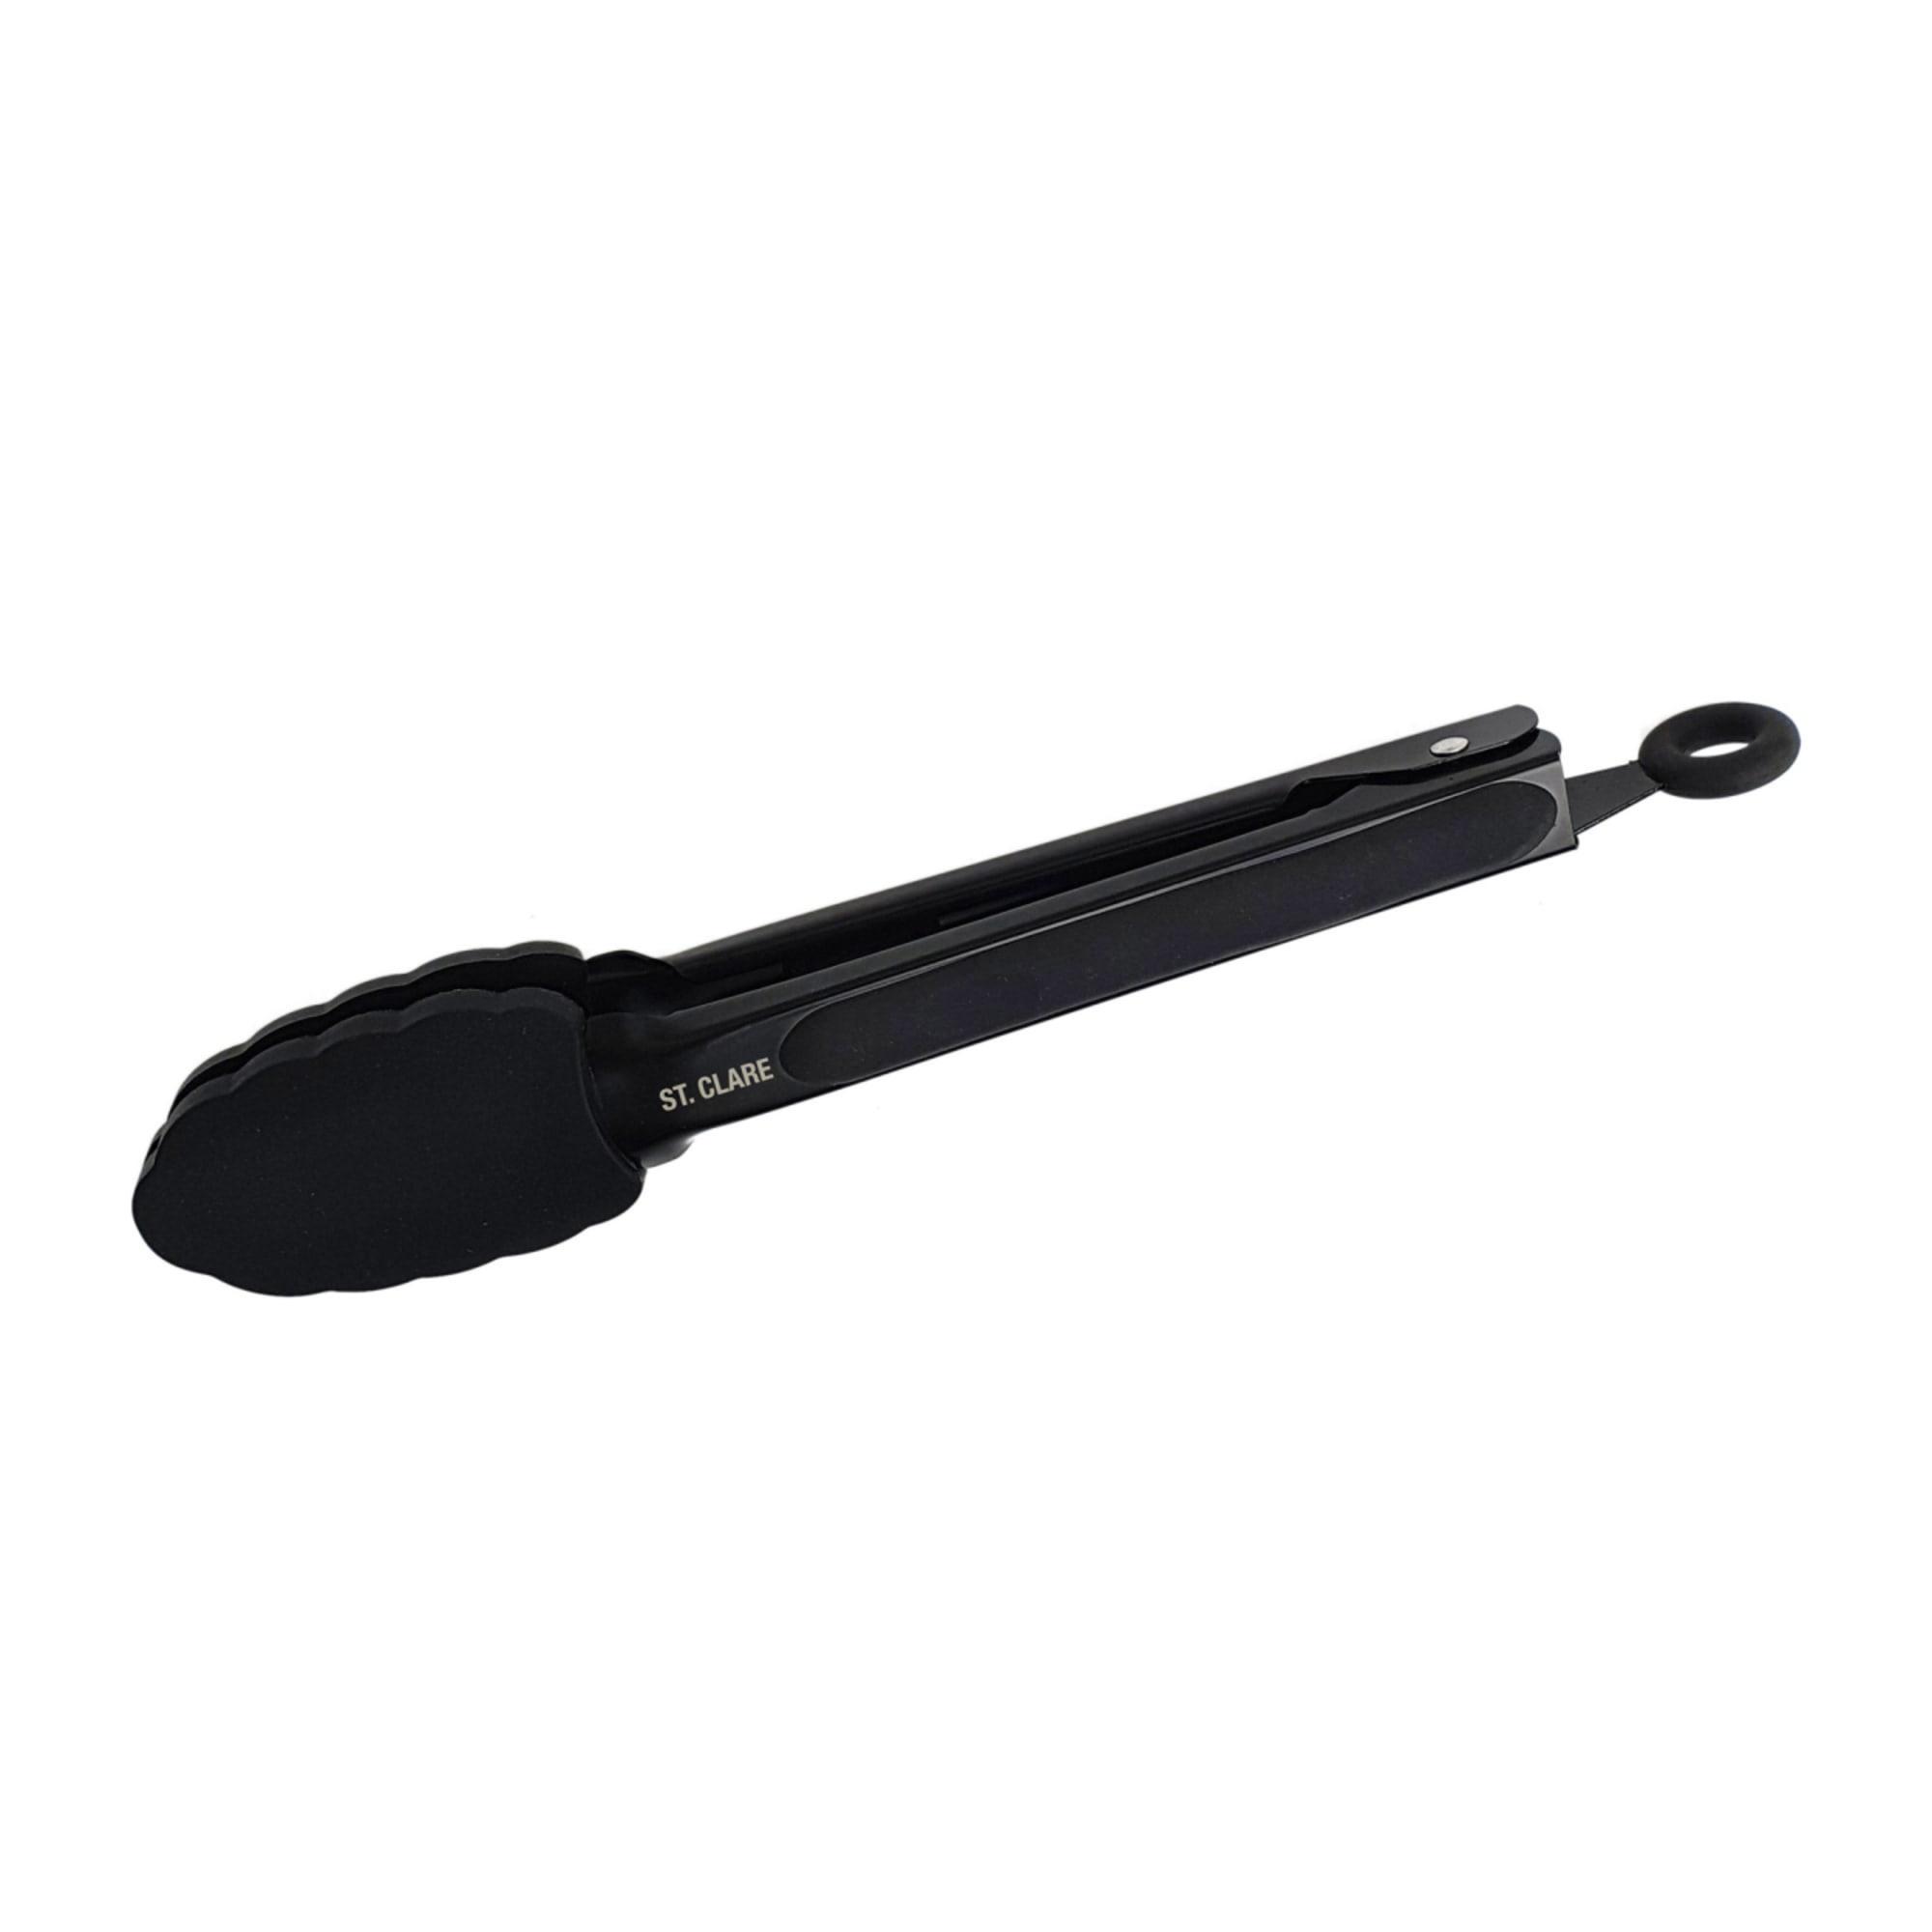 St. Clare Heavy Duty Tongs with Silicone Grip 30cm Black Image 4